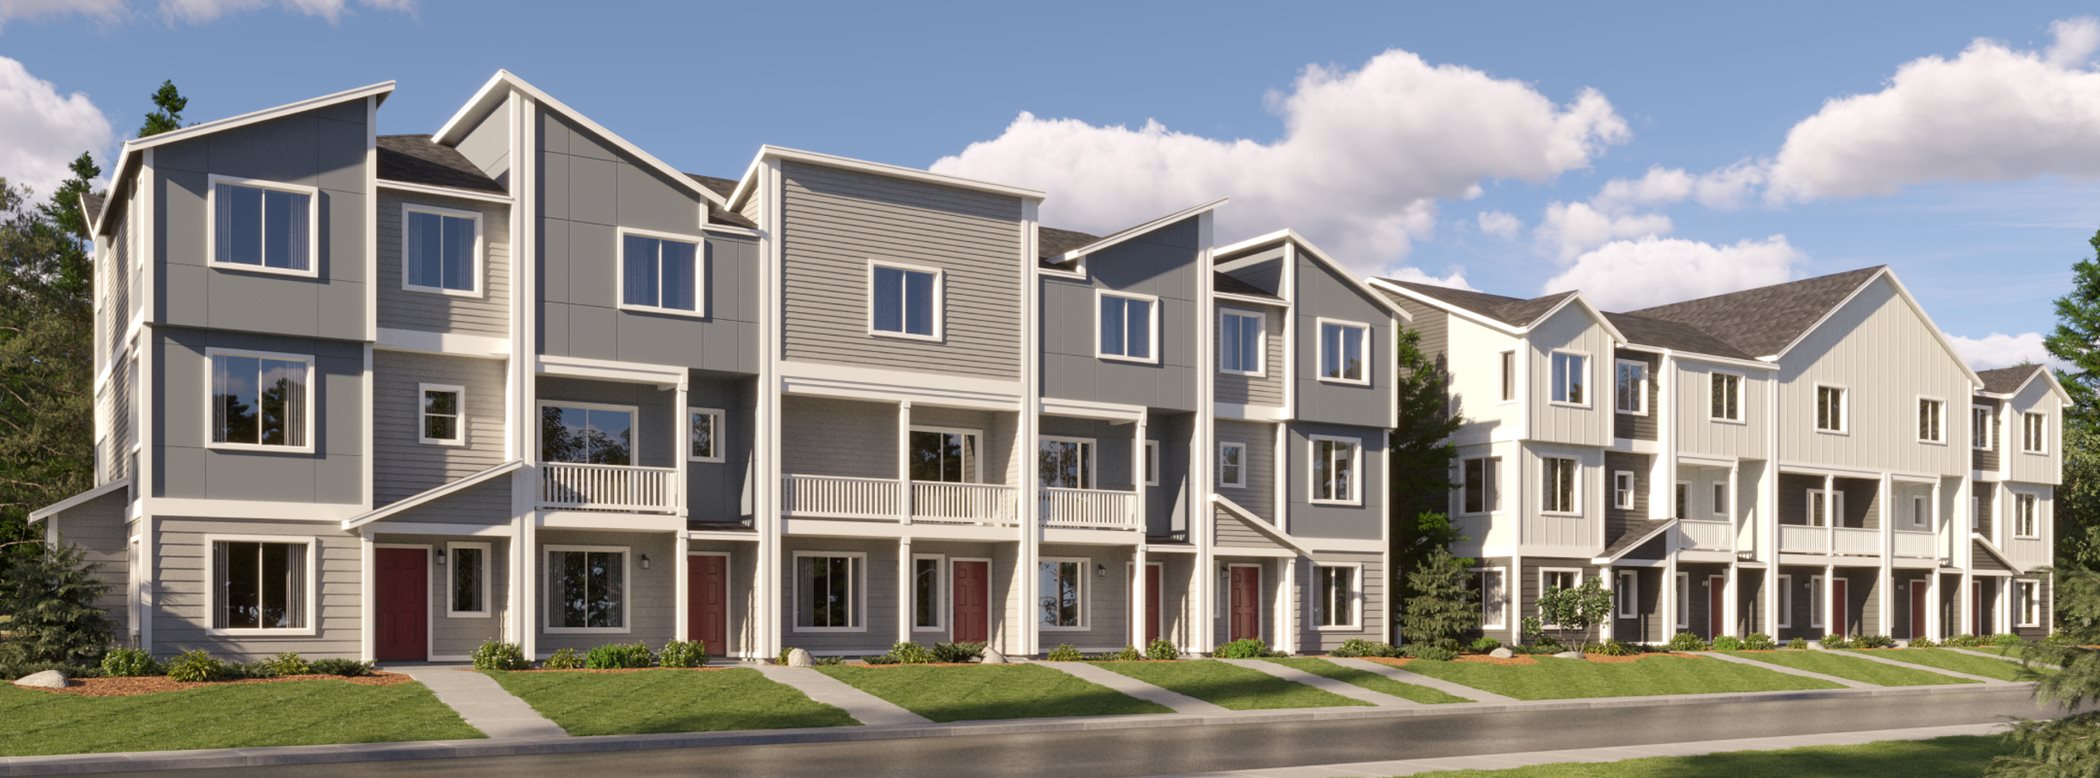 Row of townhomes at campus reserve